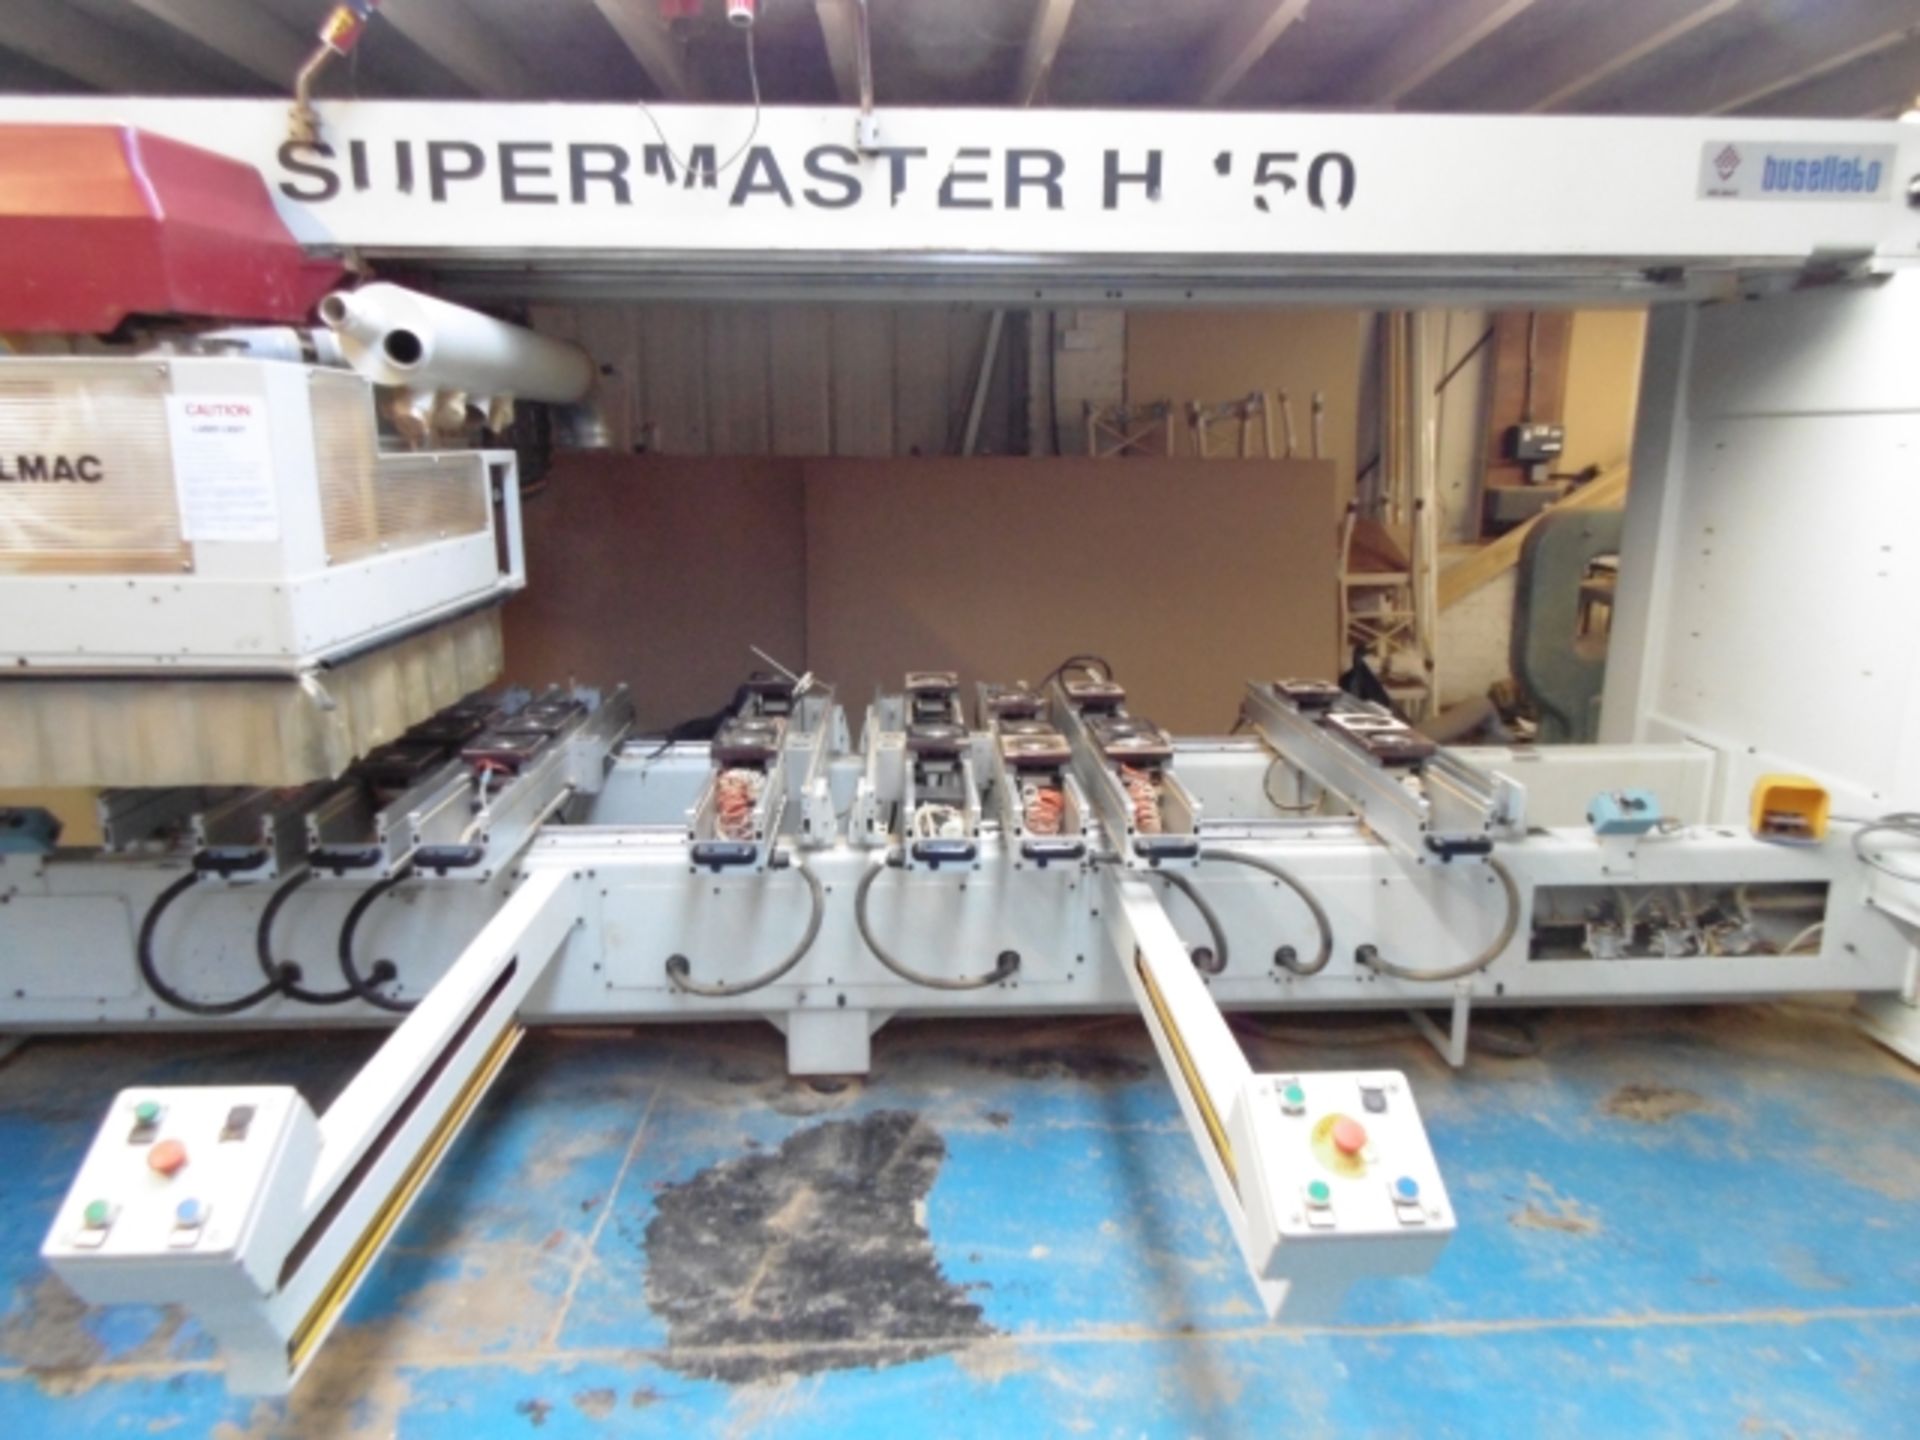 1996 DELMAC BUSELLATO SUPERMASTER H150 CNC BRIDGE - TYPE ROUTER; BED LENGTH 5400MM, 8 X SUCTION - Image 6 of 22